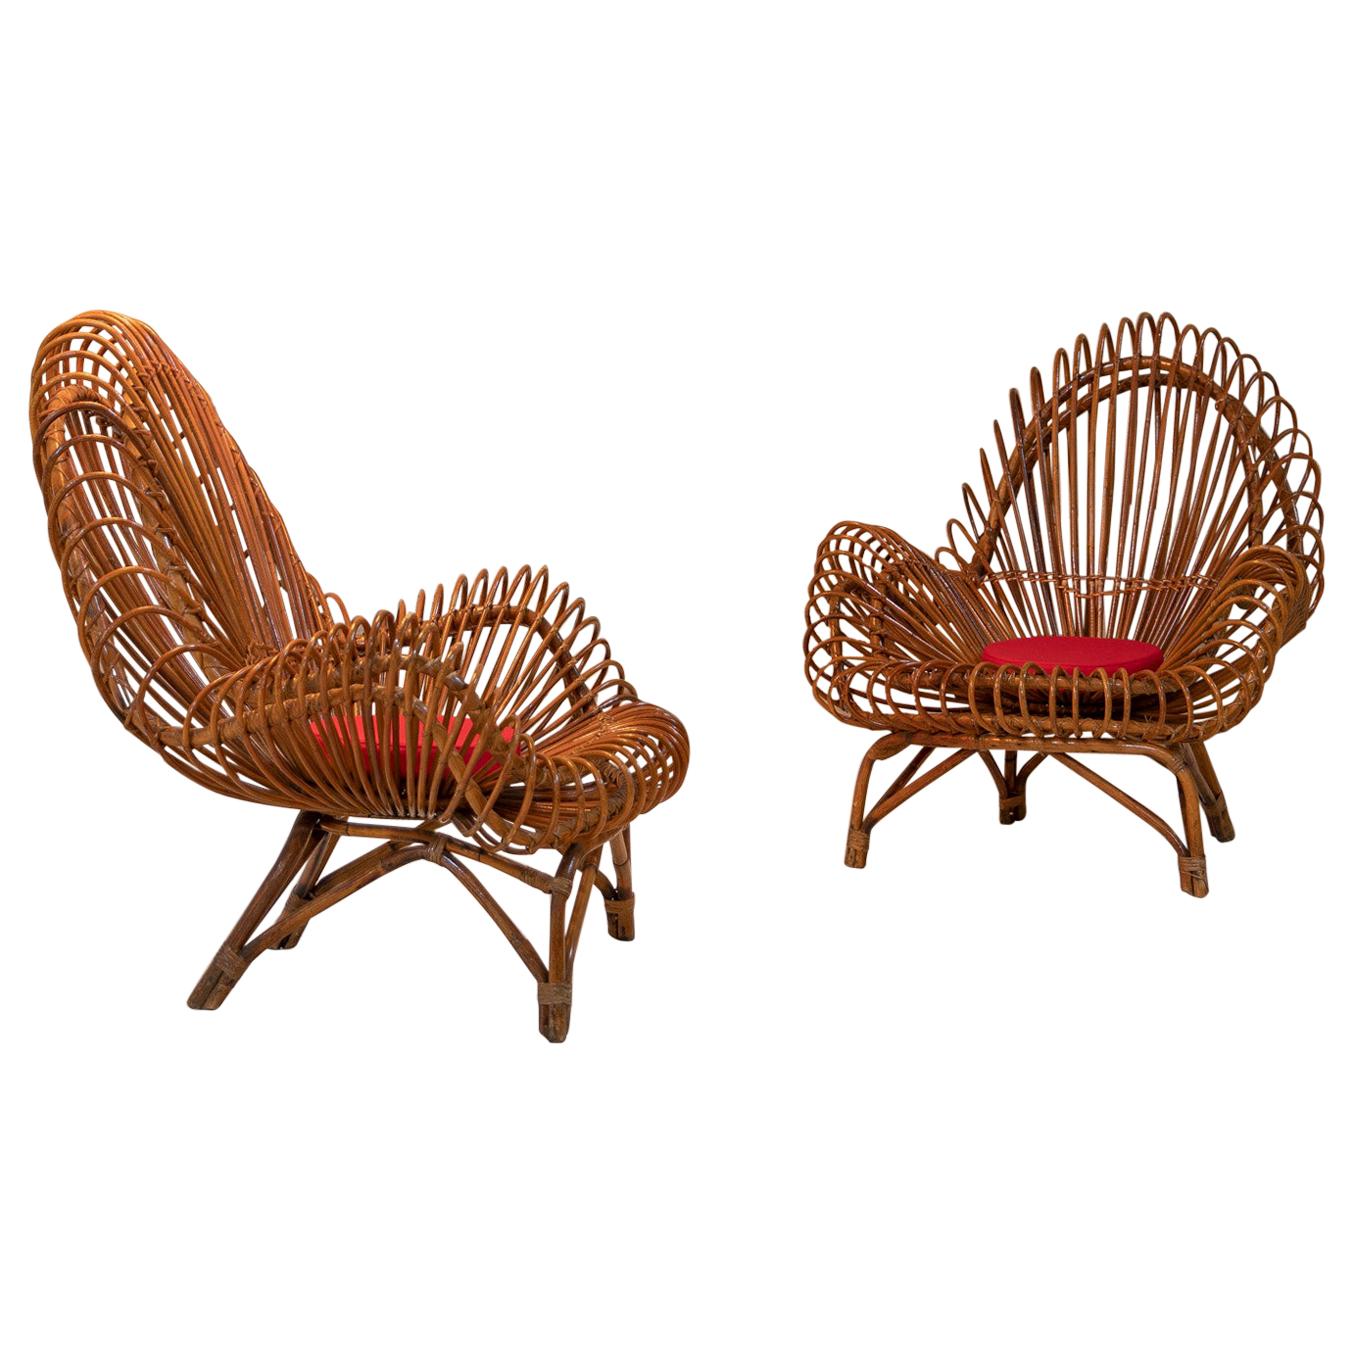 Pair of Wicker Lounge Chairs Attributed to Janine Abraham